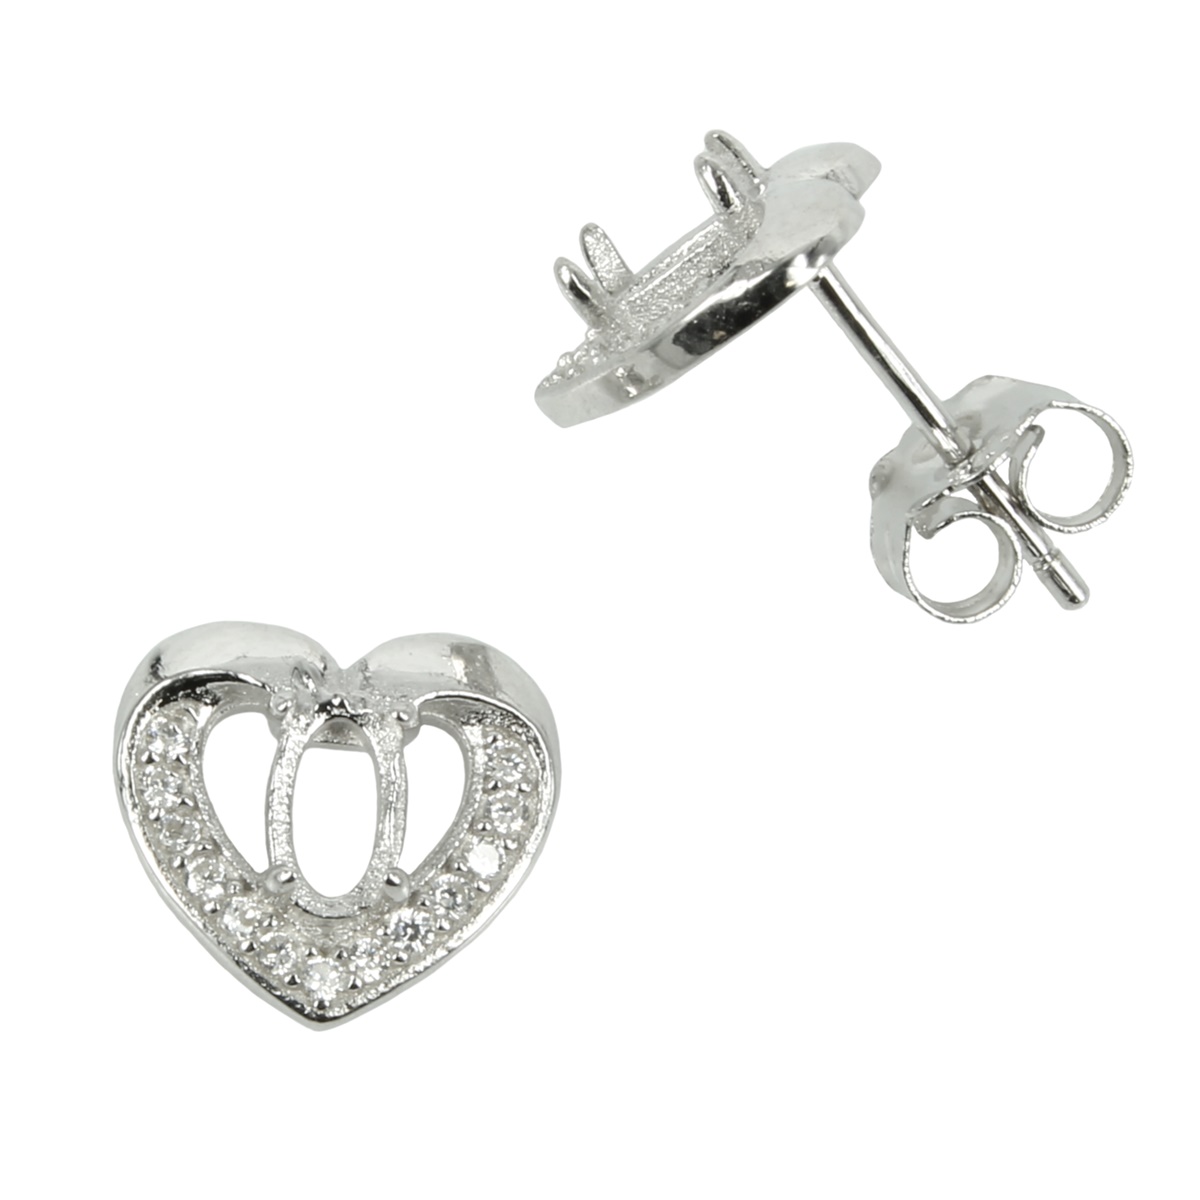 Heart Border w/CZ’s Stud Earrings with Oval Prong Mounting in Sterling Silver for 3x5mm Stones 